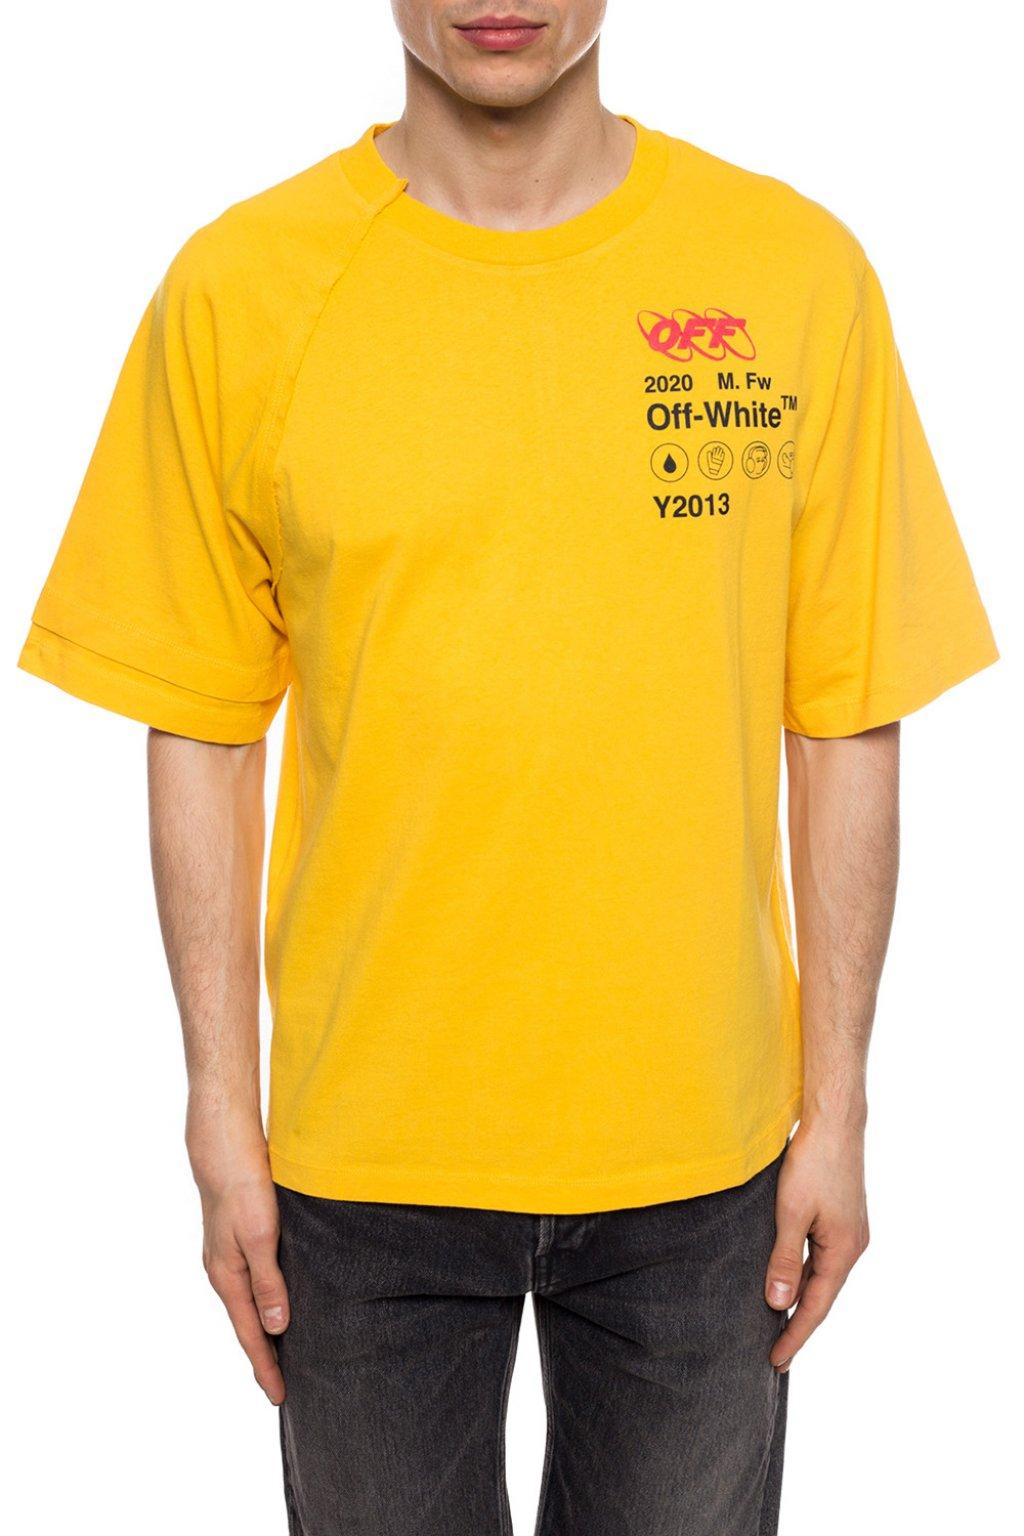 OFF-WHITE Industrial Y013 T-Shirt Yellow/Multicolor | islamiyyat.com